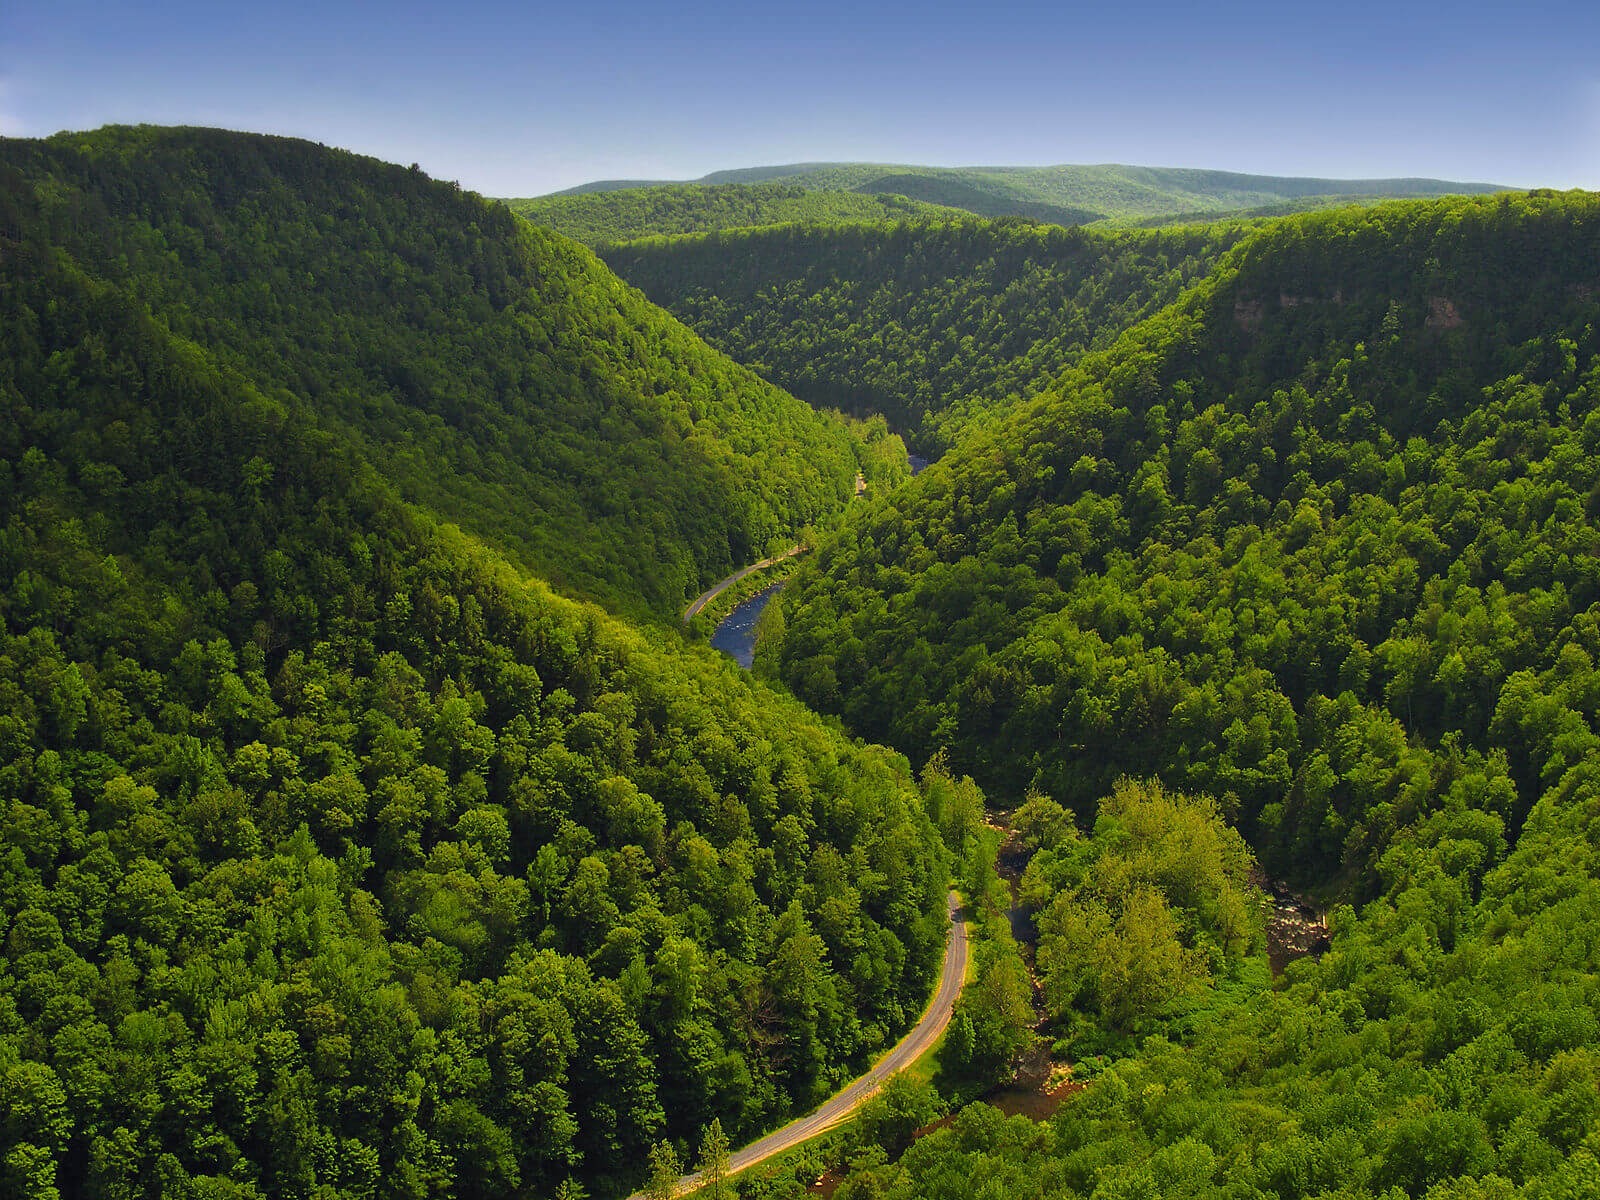 Rolling hills covered in emerald green trees surround an e-bike trail and river along the Pine Creek Trail in Pennsylvania